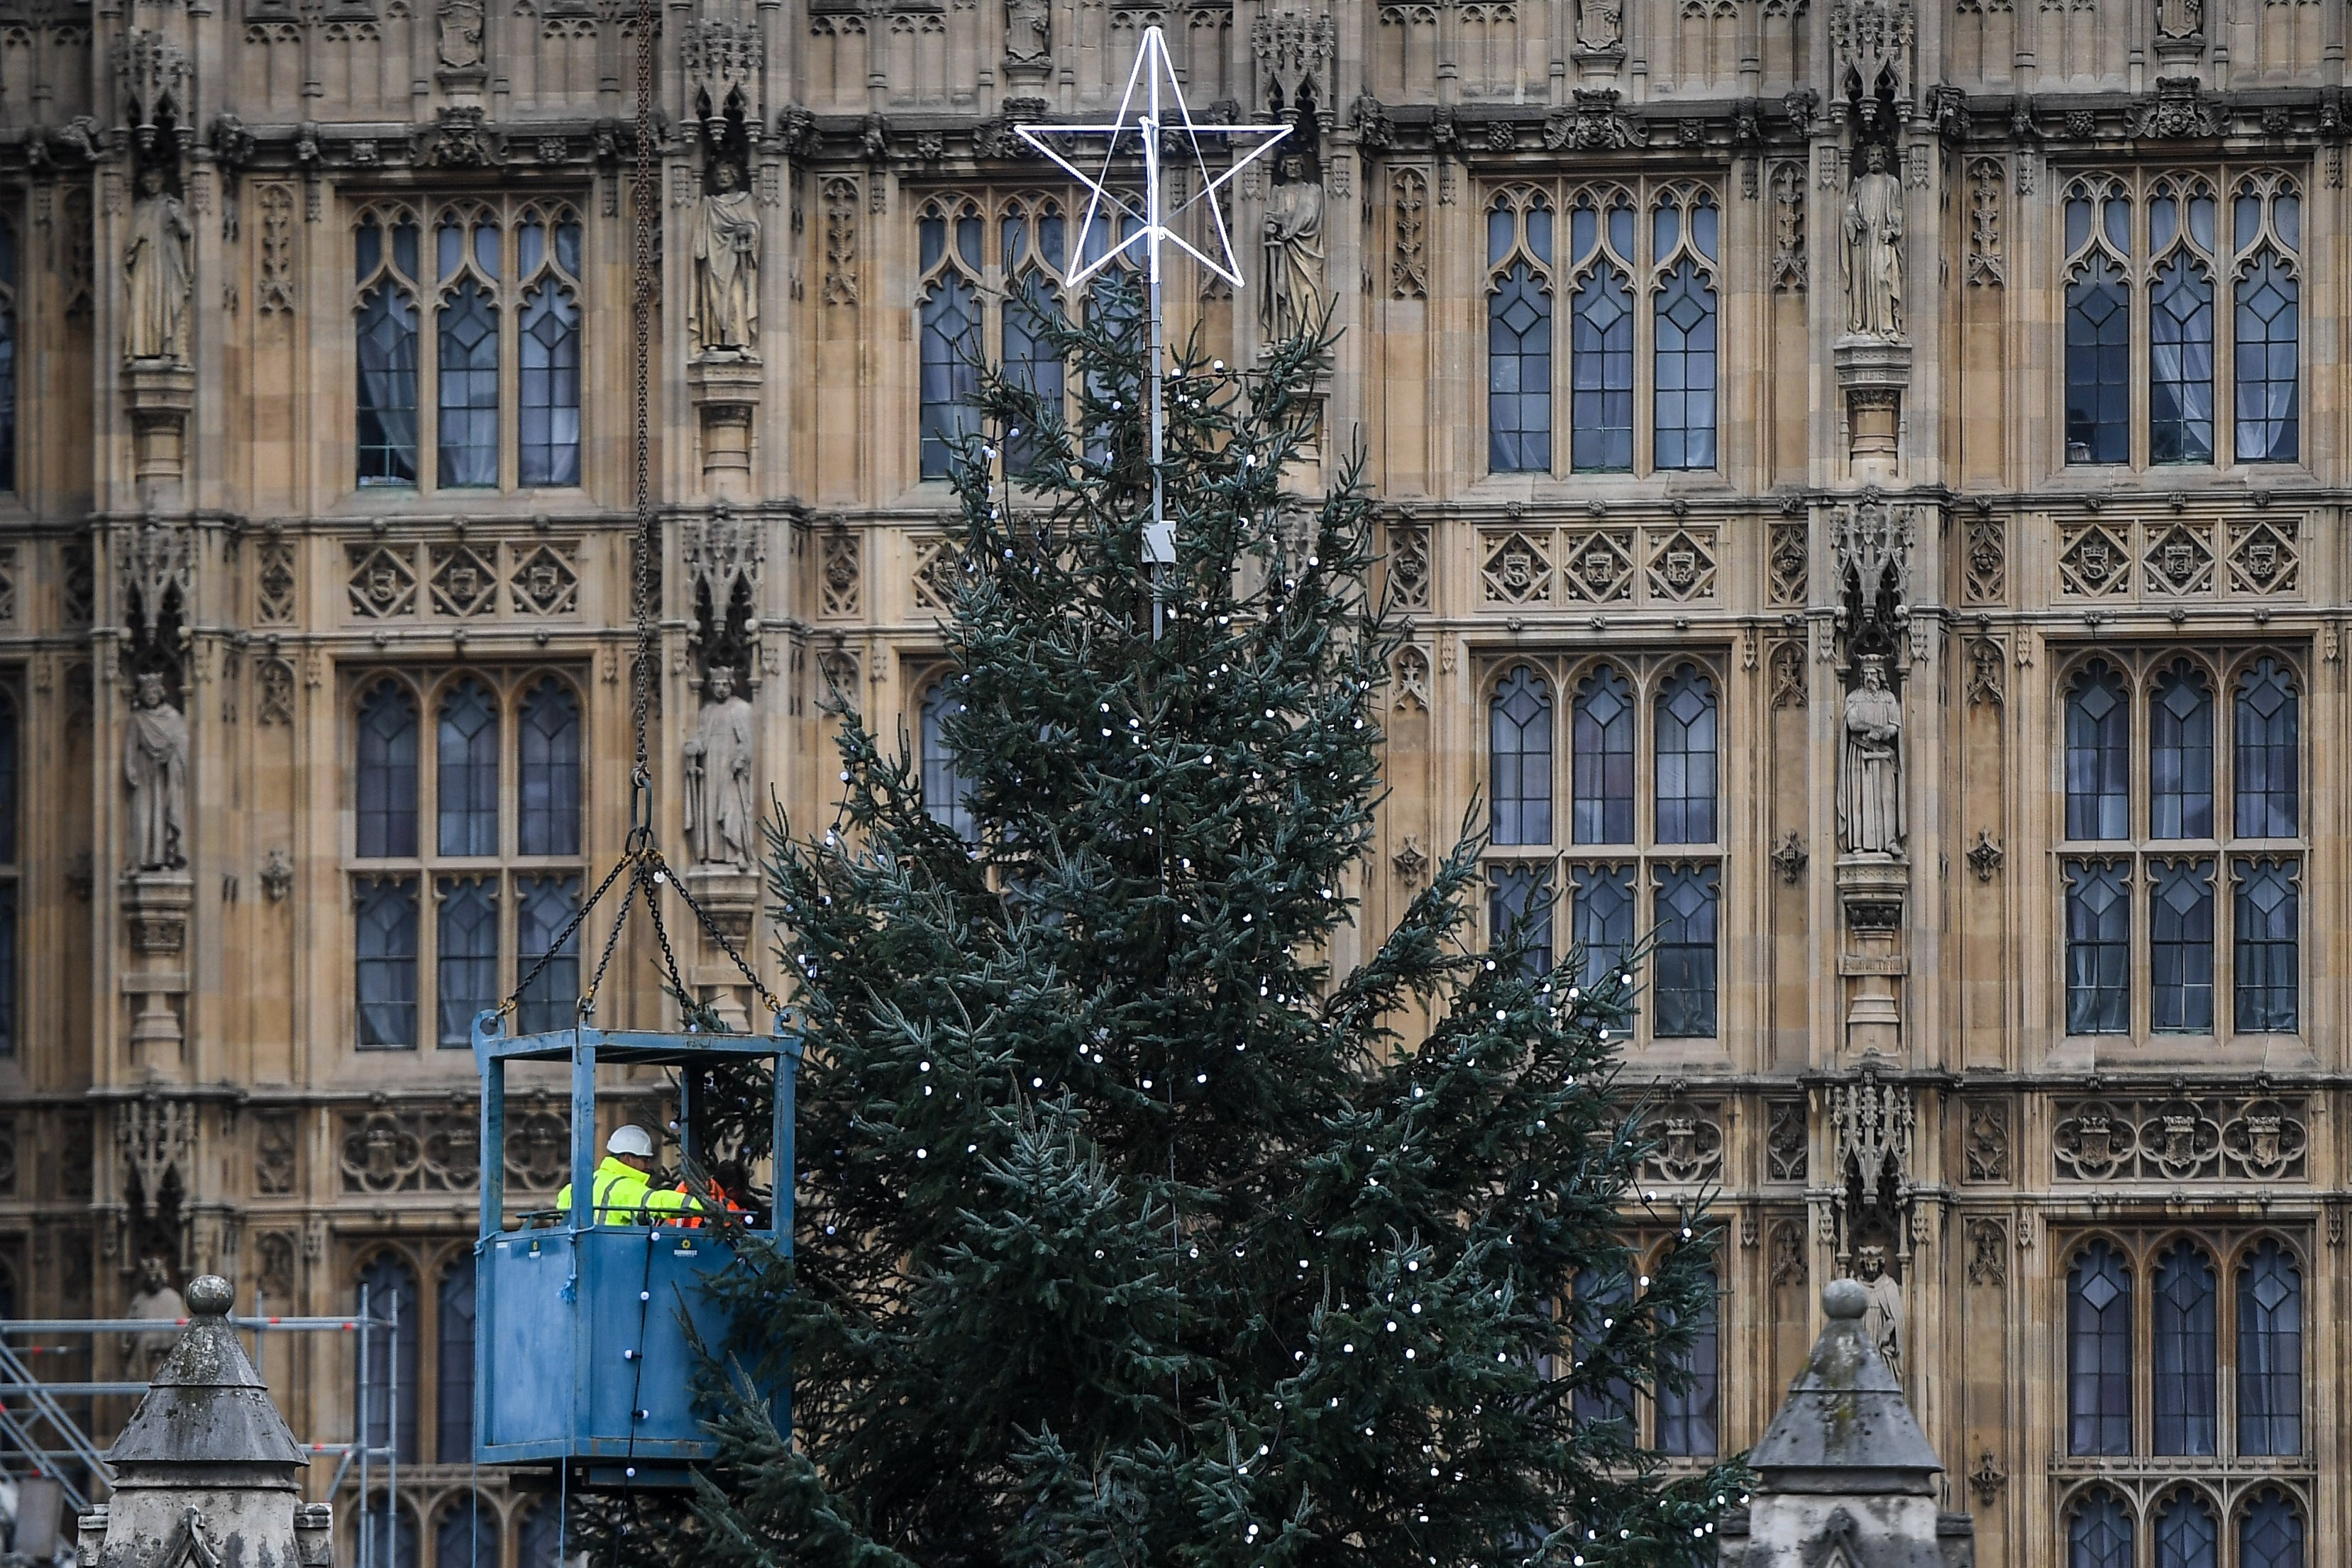 Workers add lights to the tree outside the Commons on Saturday